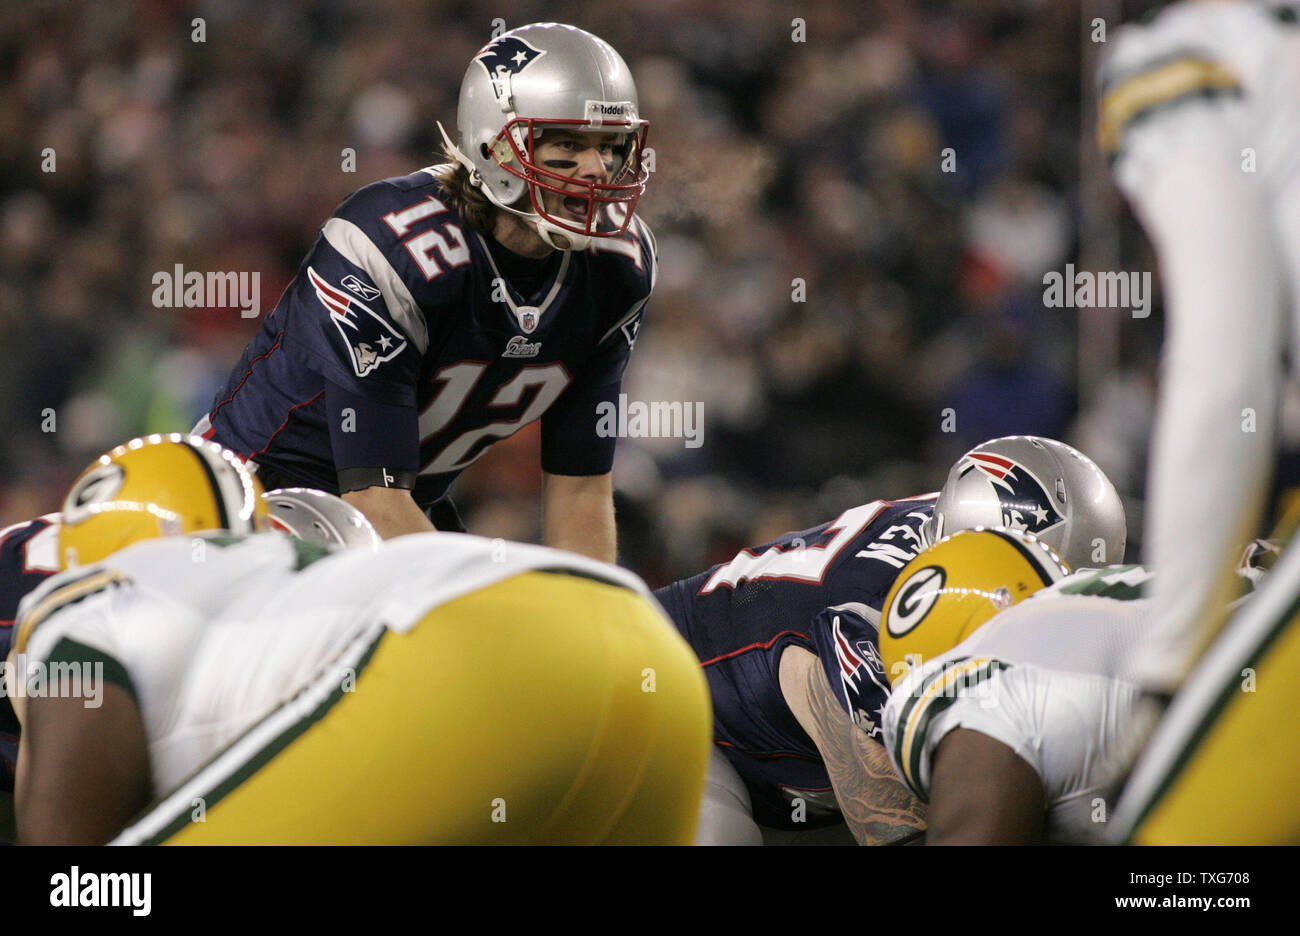 New England Patriots quarterback Tom Brady lines up against the Green Bay Packers in the second quarter at Gillette Stadium in Foxboro, Massachusetts on December 19, 2010.  The Patriots defeated the Packers 31-27.  UPI/Matthew Healey Stock Photo